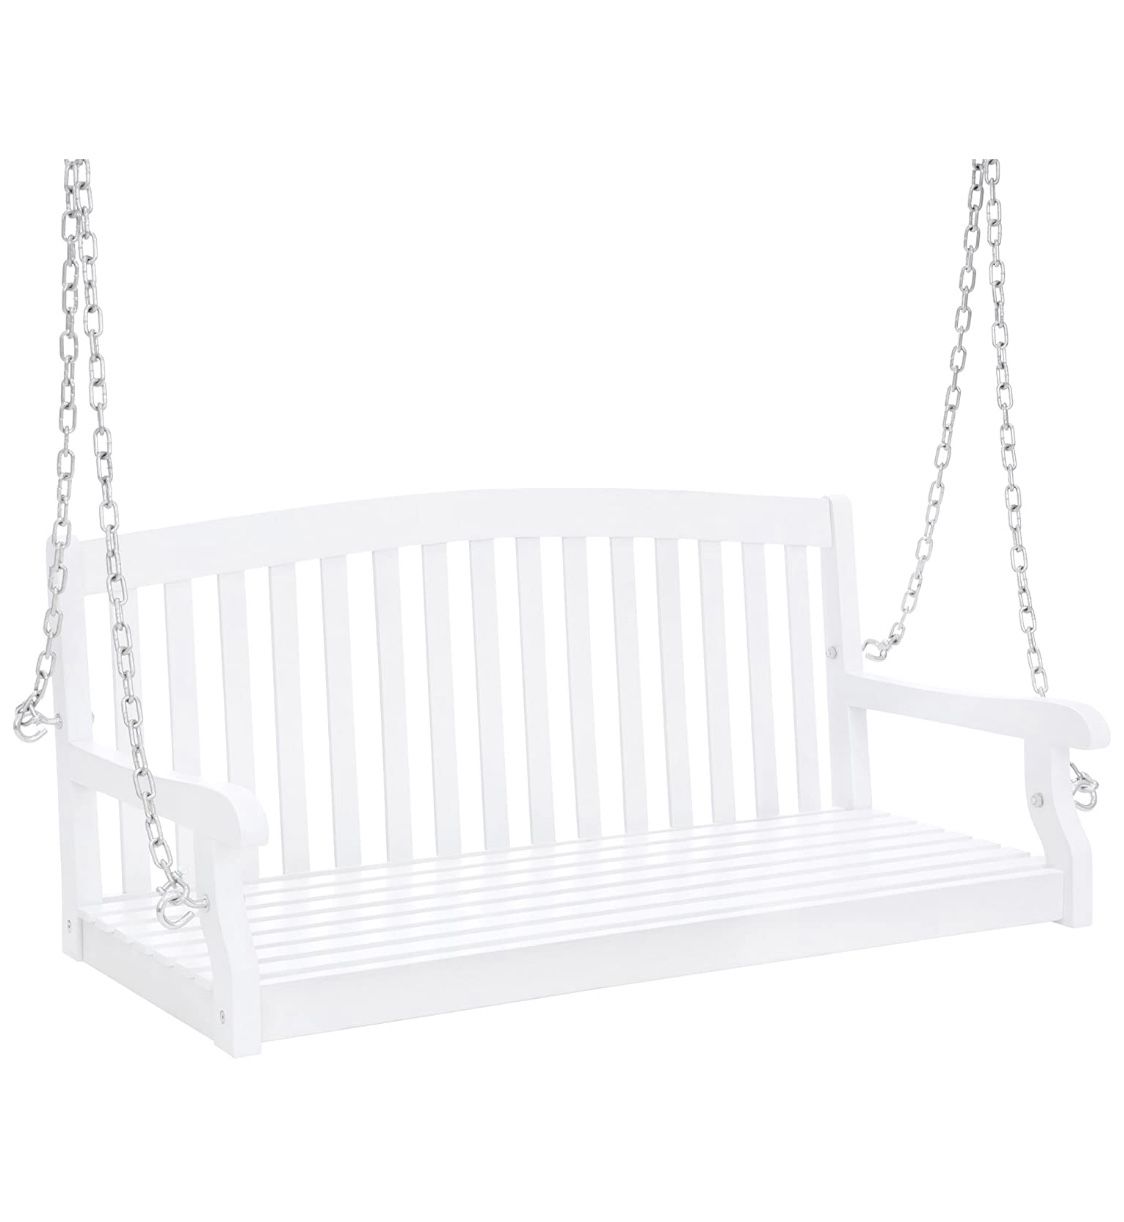 48in Wooden Curved Back Hanging Porch Swing Bench w/Metal Chains for Patio, Deck, Garden - White